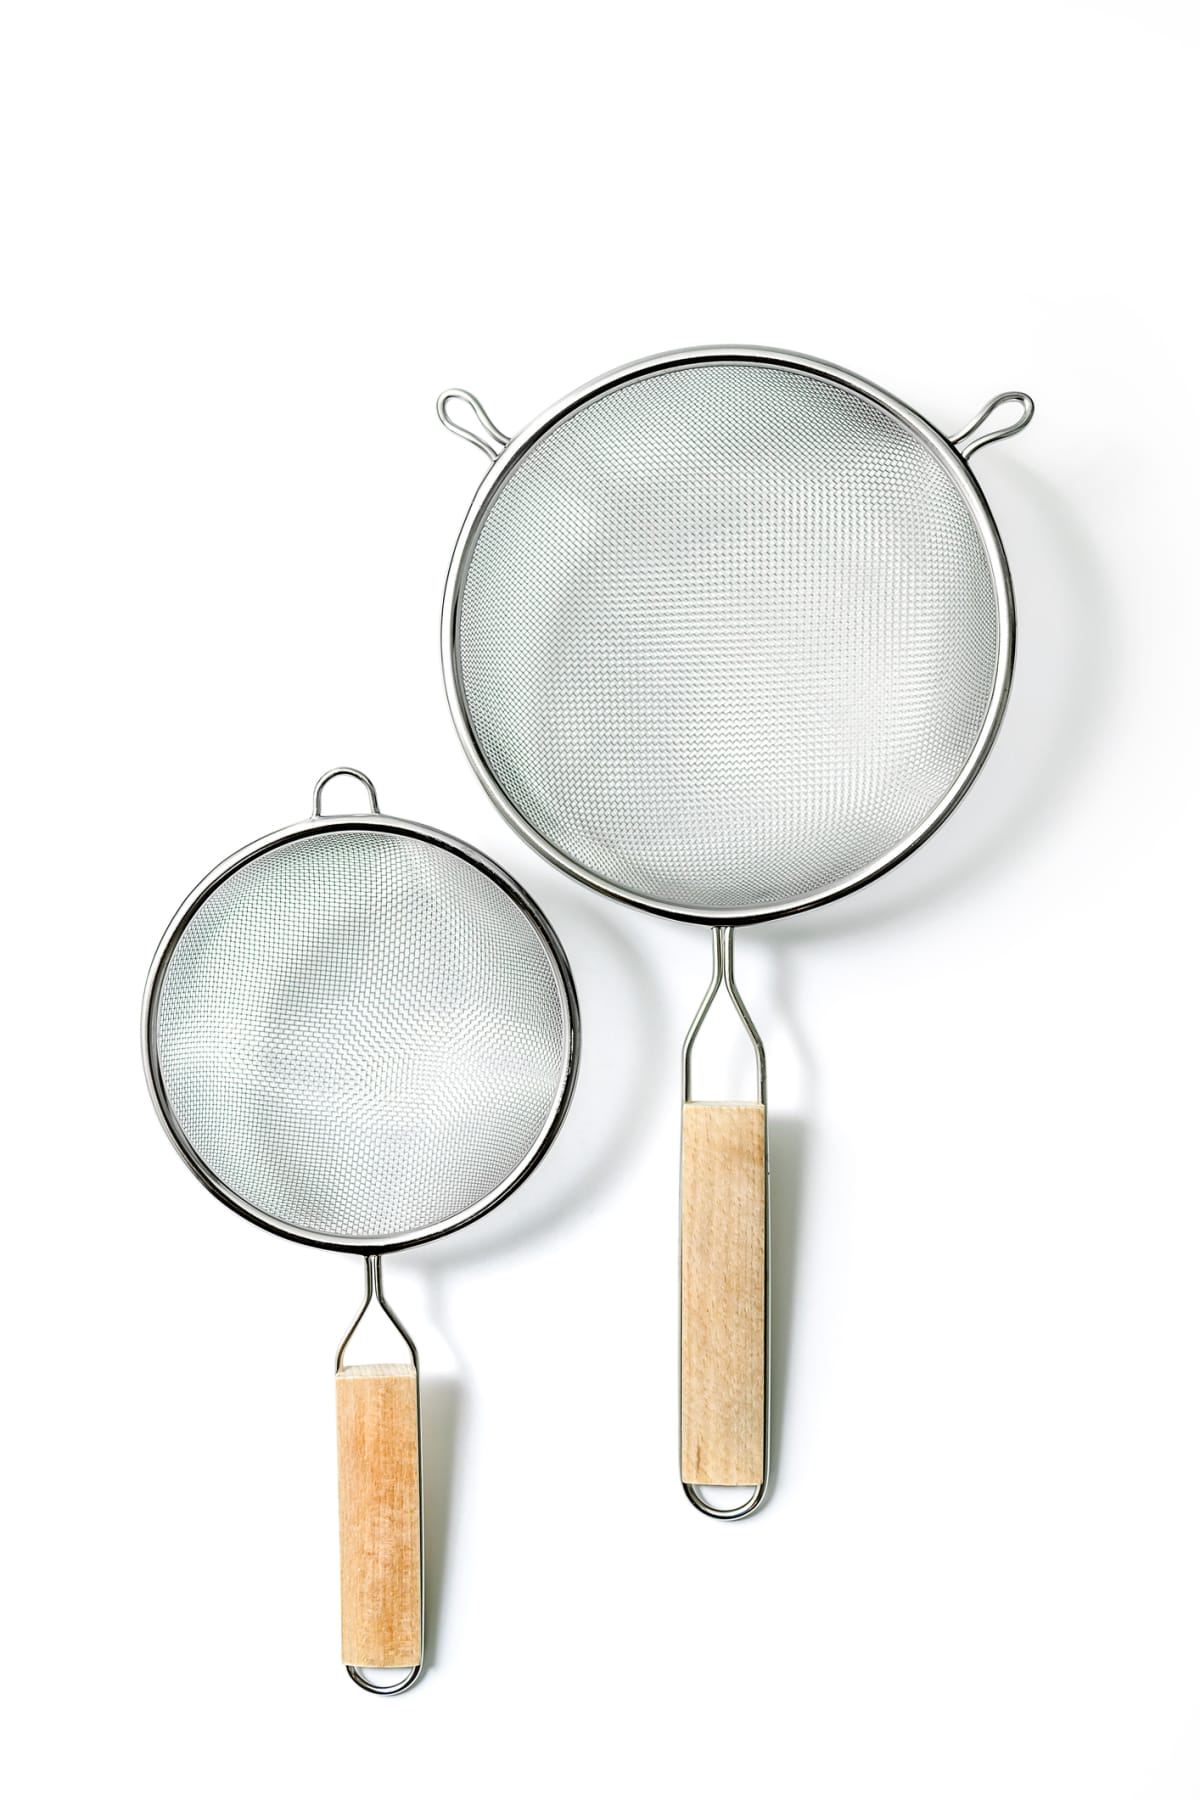 two metal sieves of different sizes